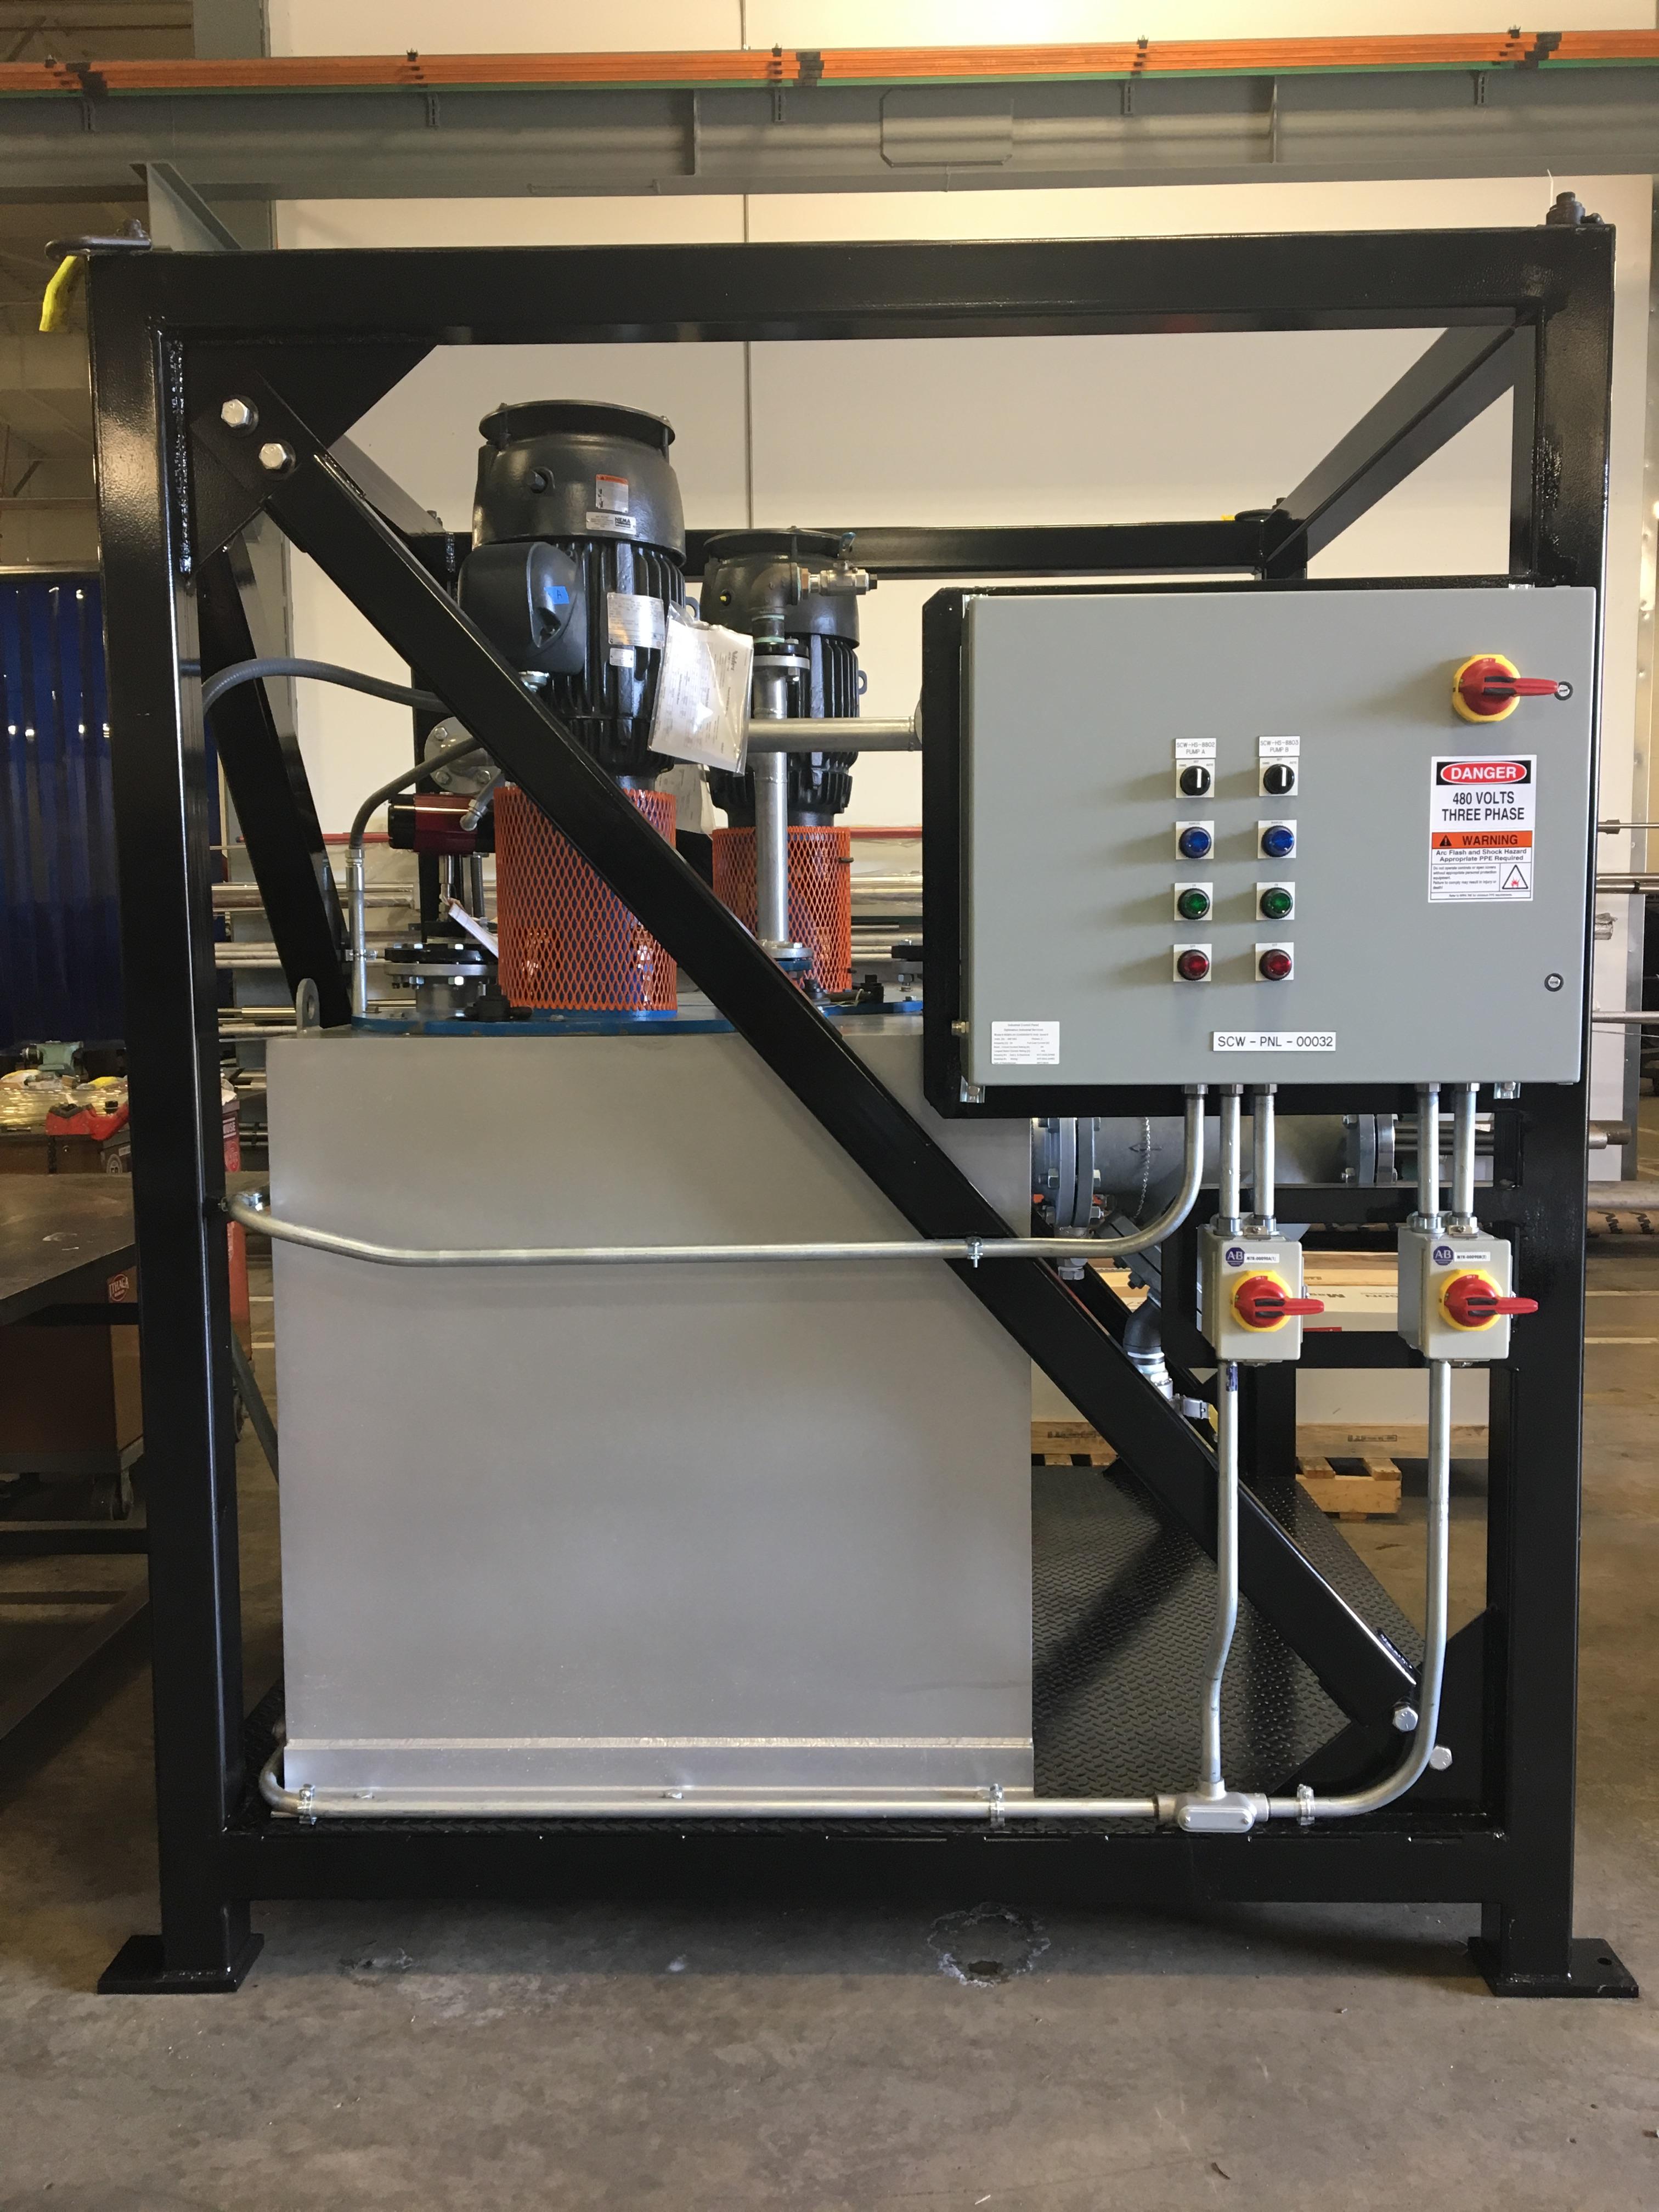 Steam Condensate Skid for Radioactive Waste Processing